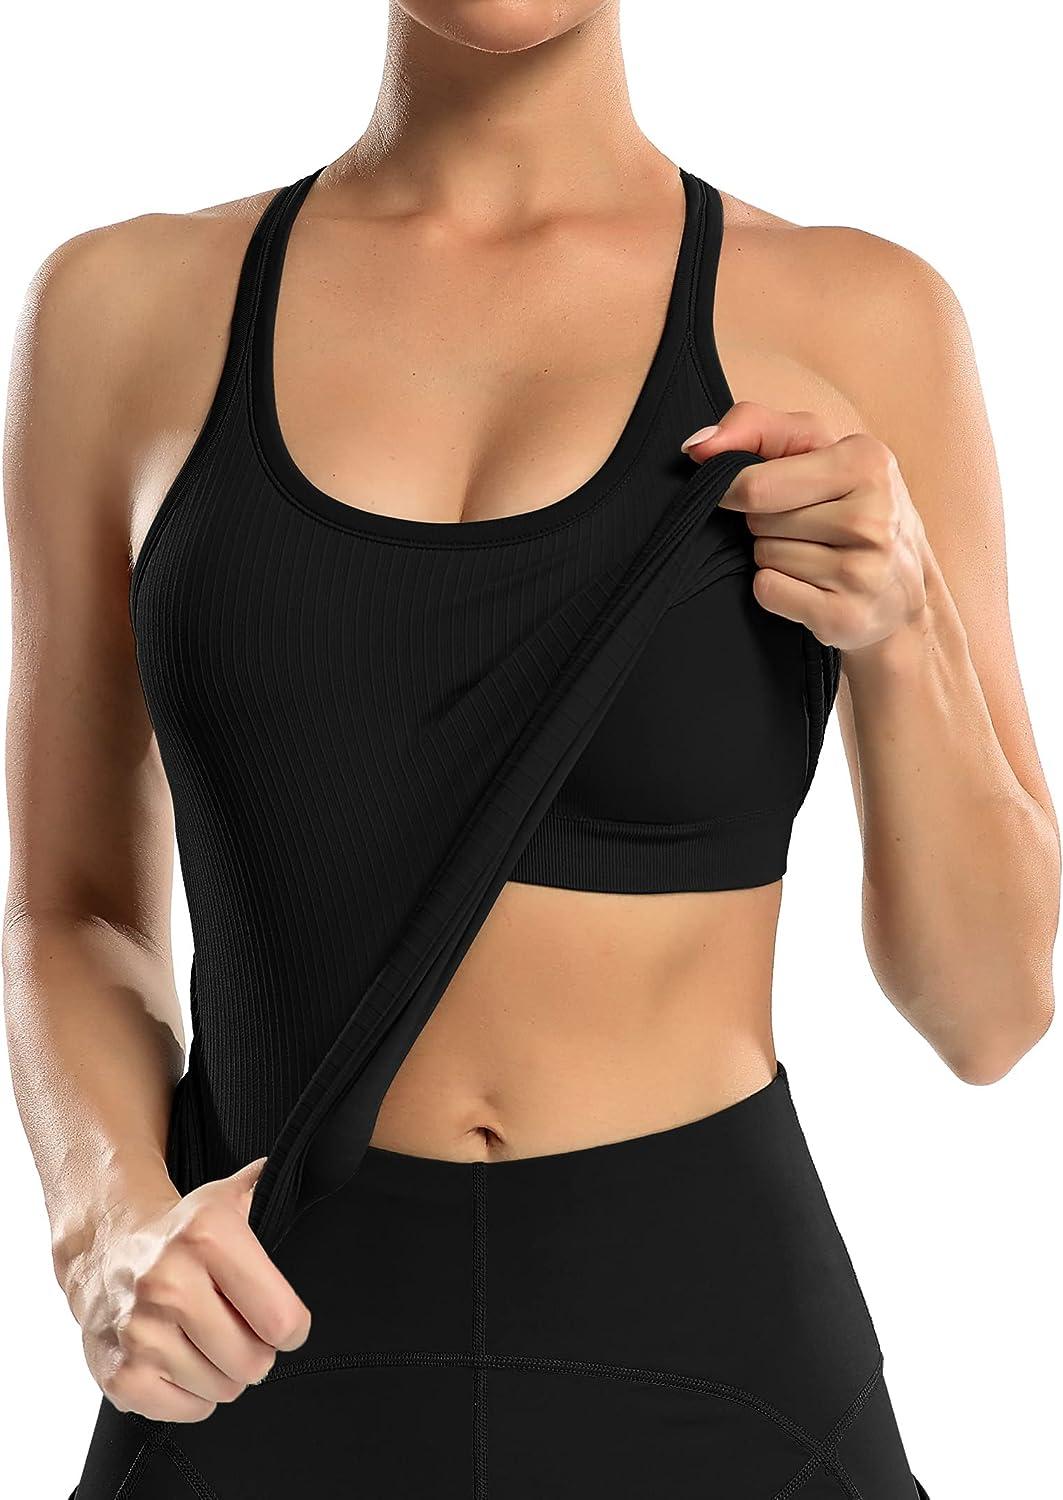 Ribbed Workout Short Racerback Tank Tops for Women with Built in Bra